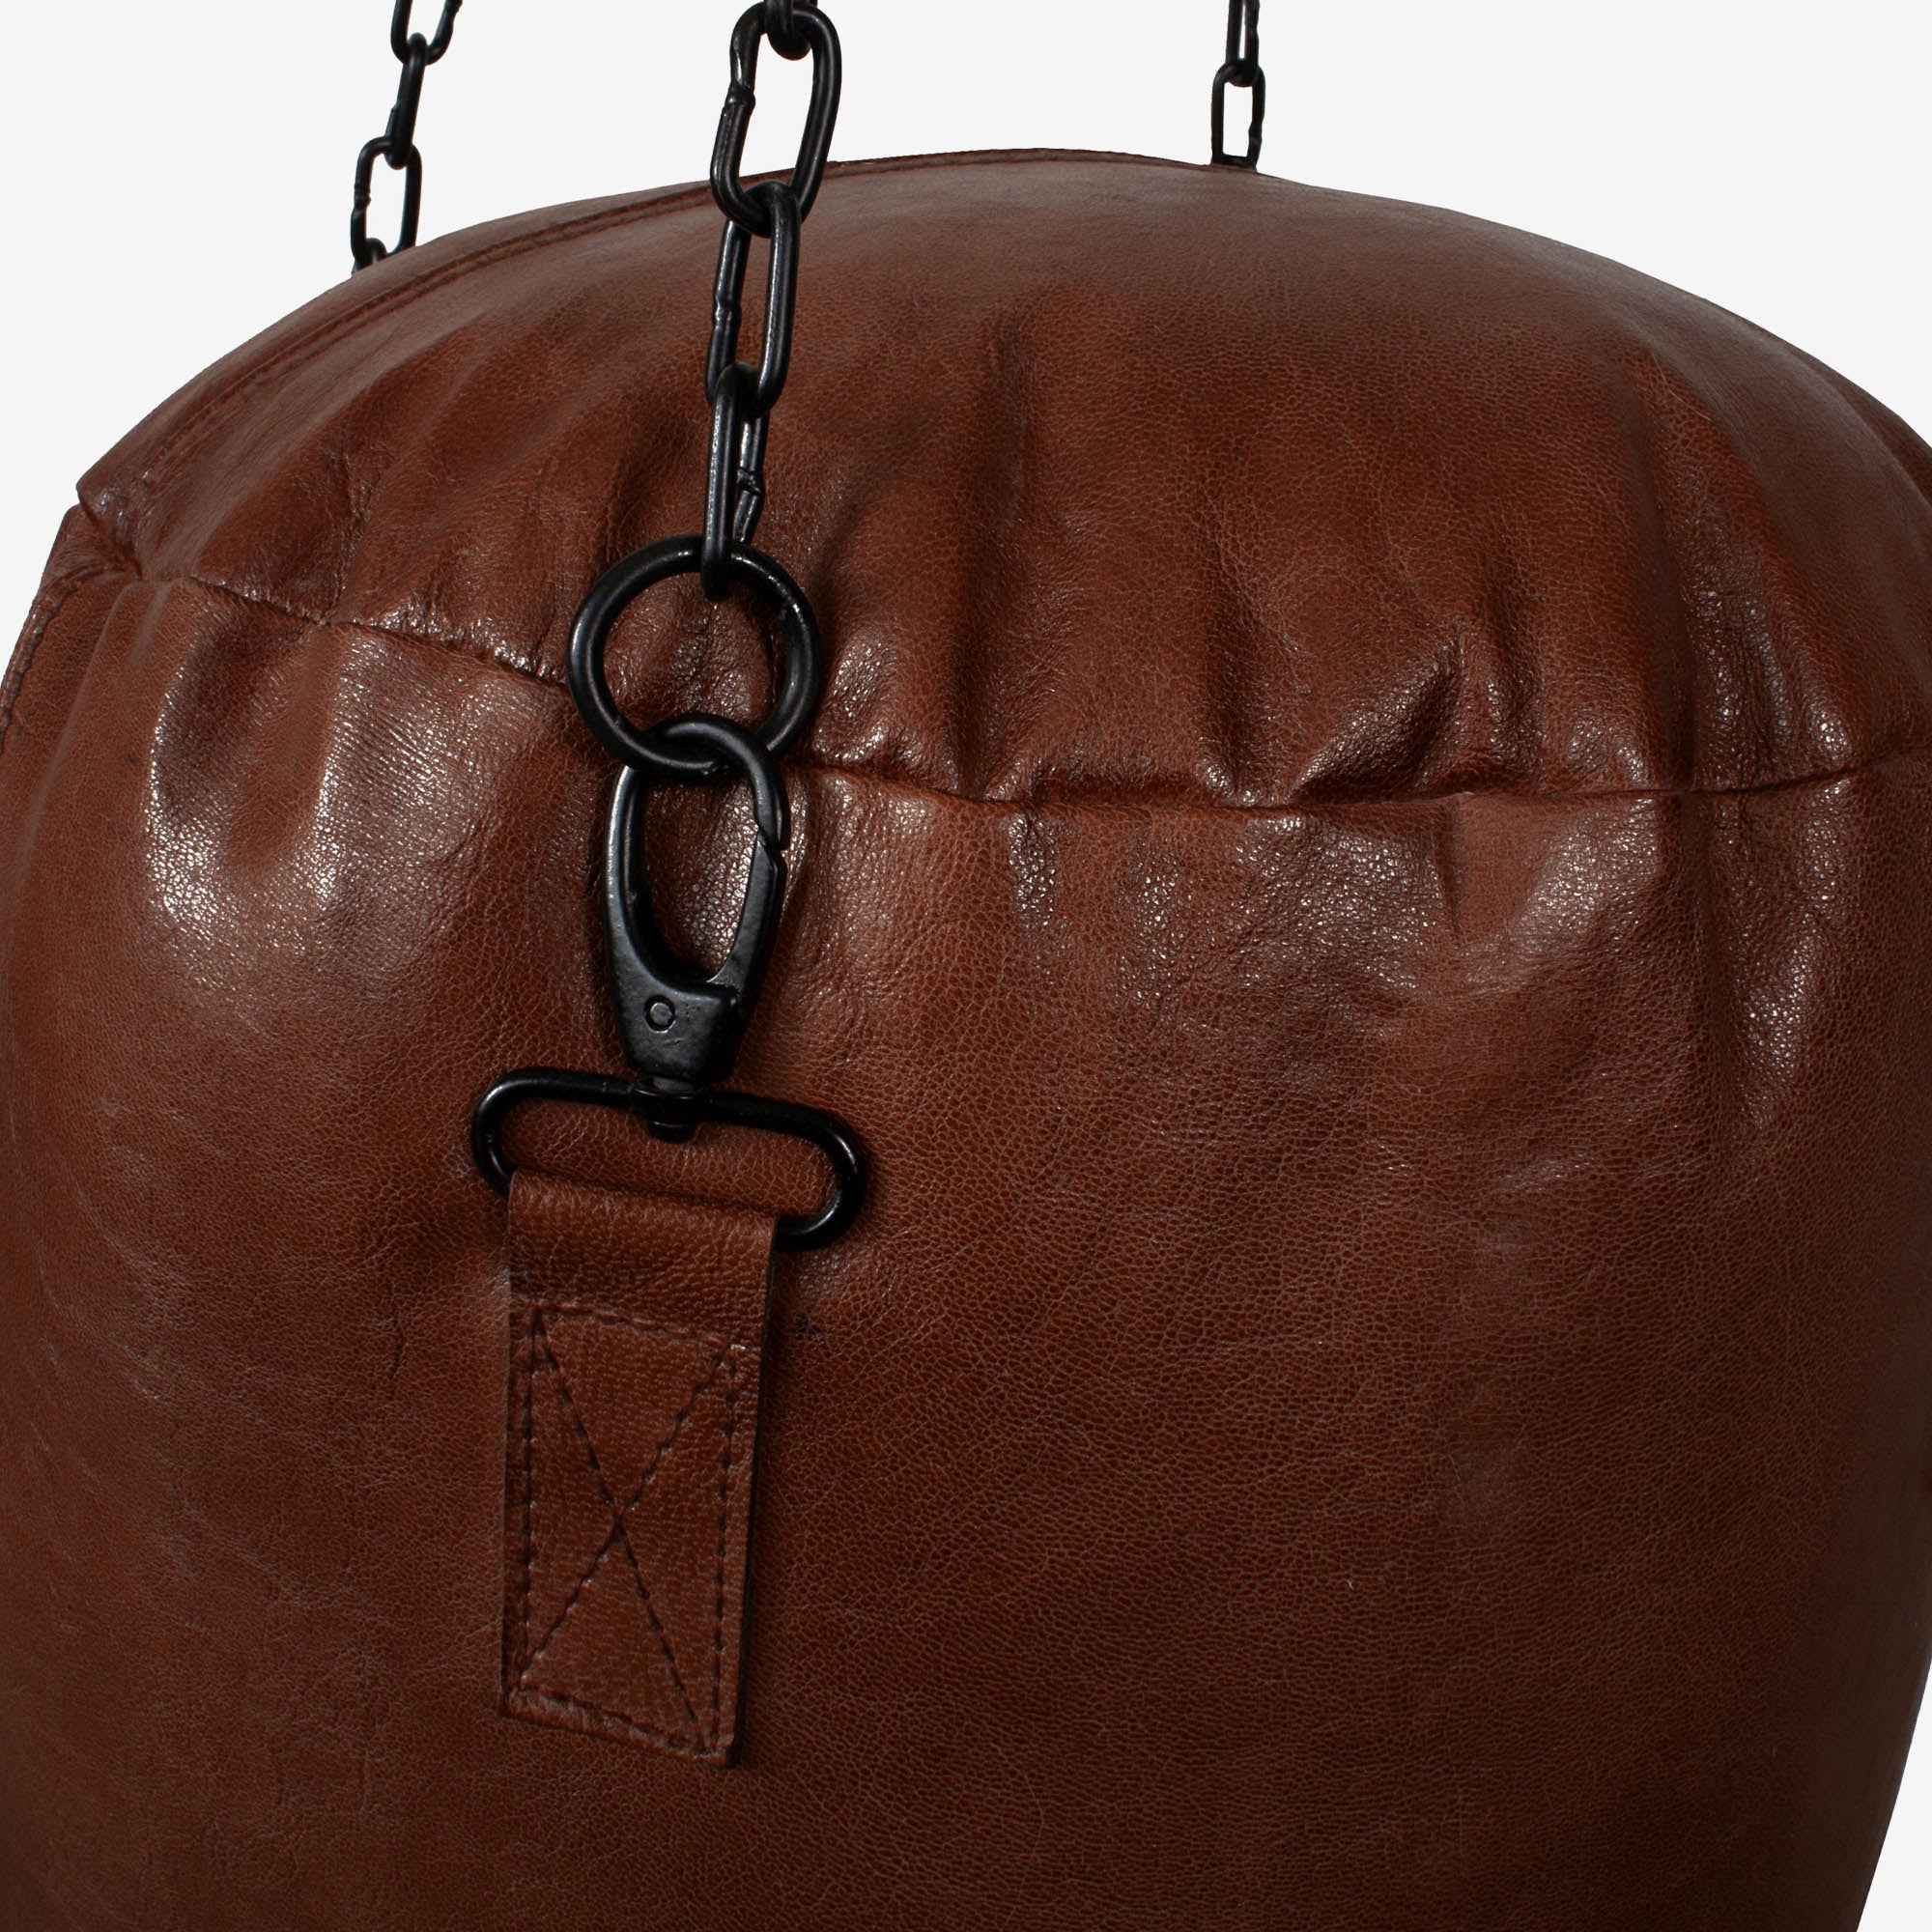 Leater punching bag small – large h68xdsn.32cm